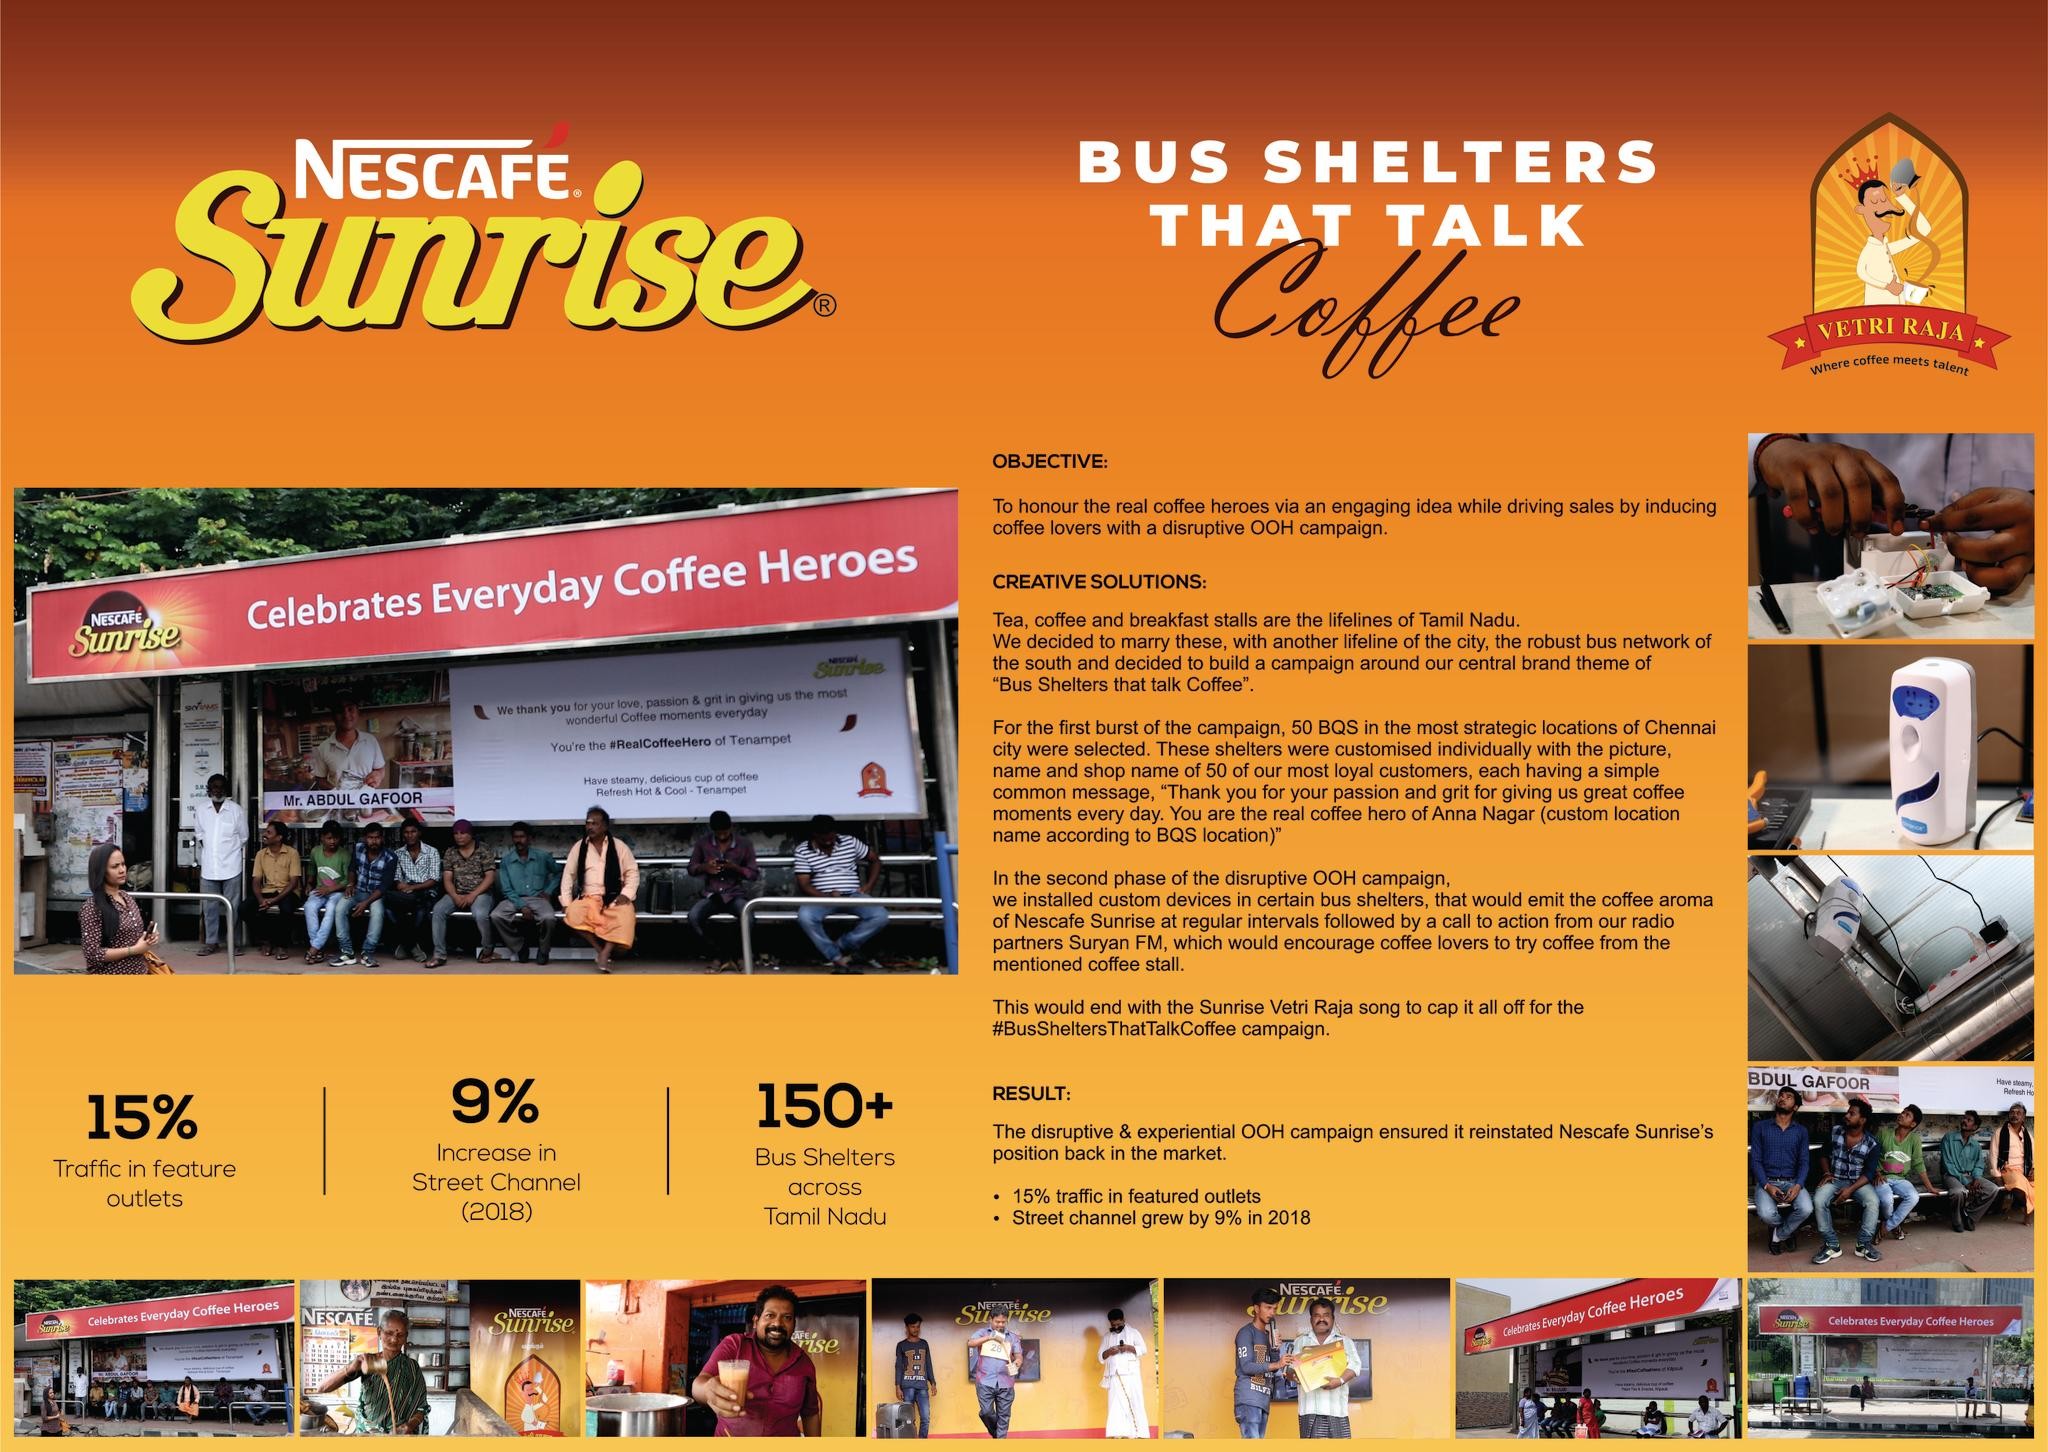 Bus Shelters that talk Coffee